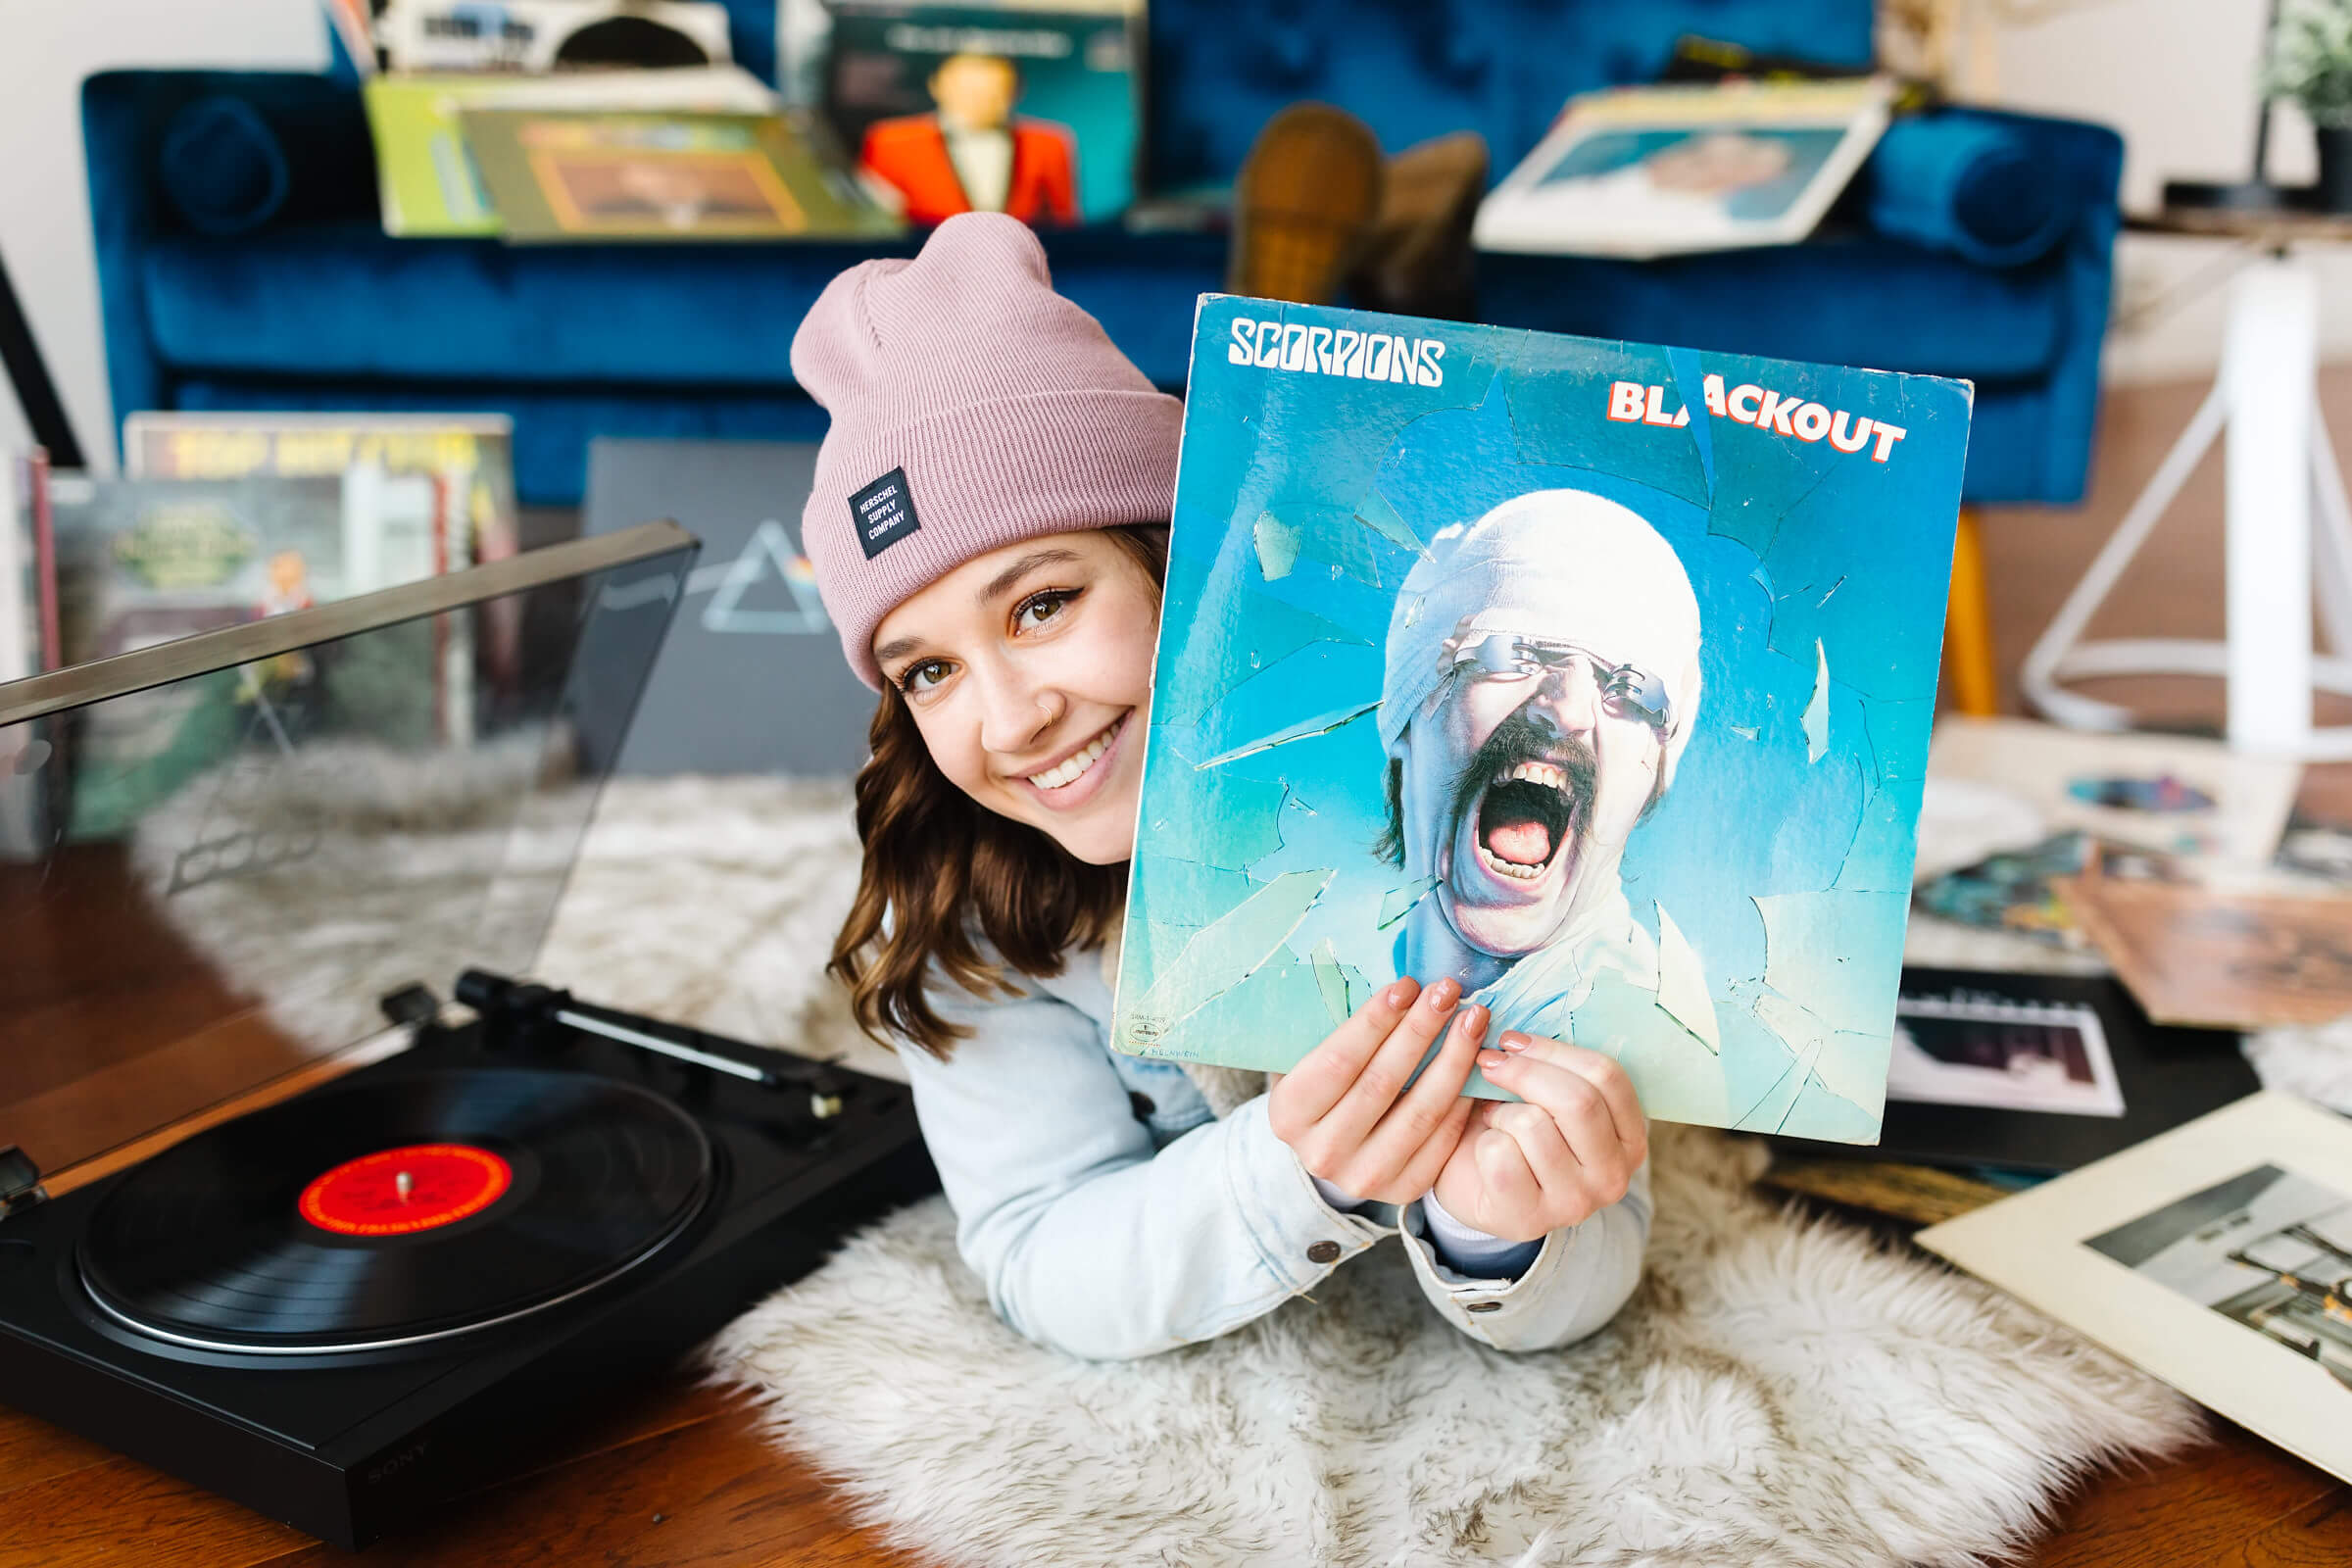 girl wearing pink beanie and blue jean jacket, laying on her stomach next to record player, holding vinyl record album in front of her face during senior studio photoshoot